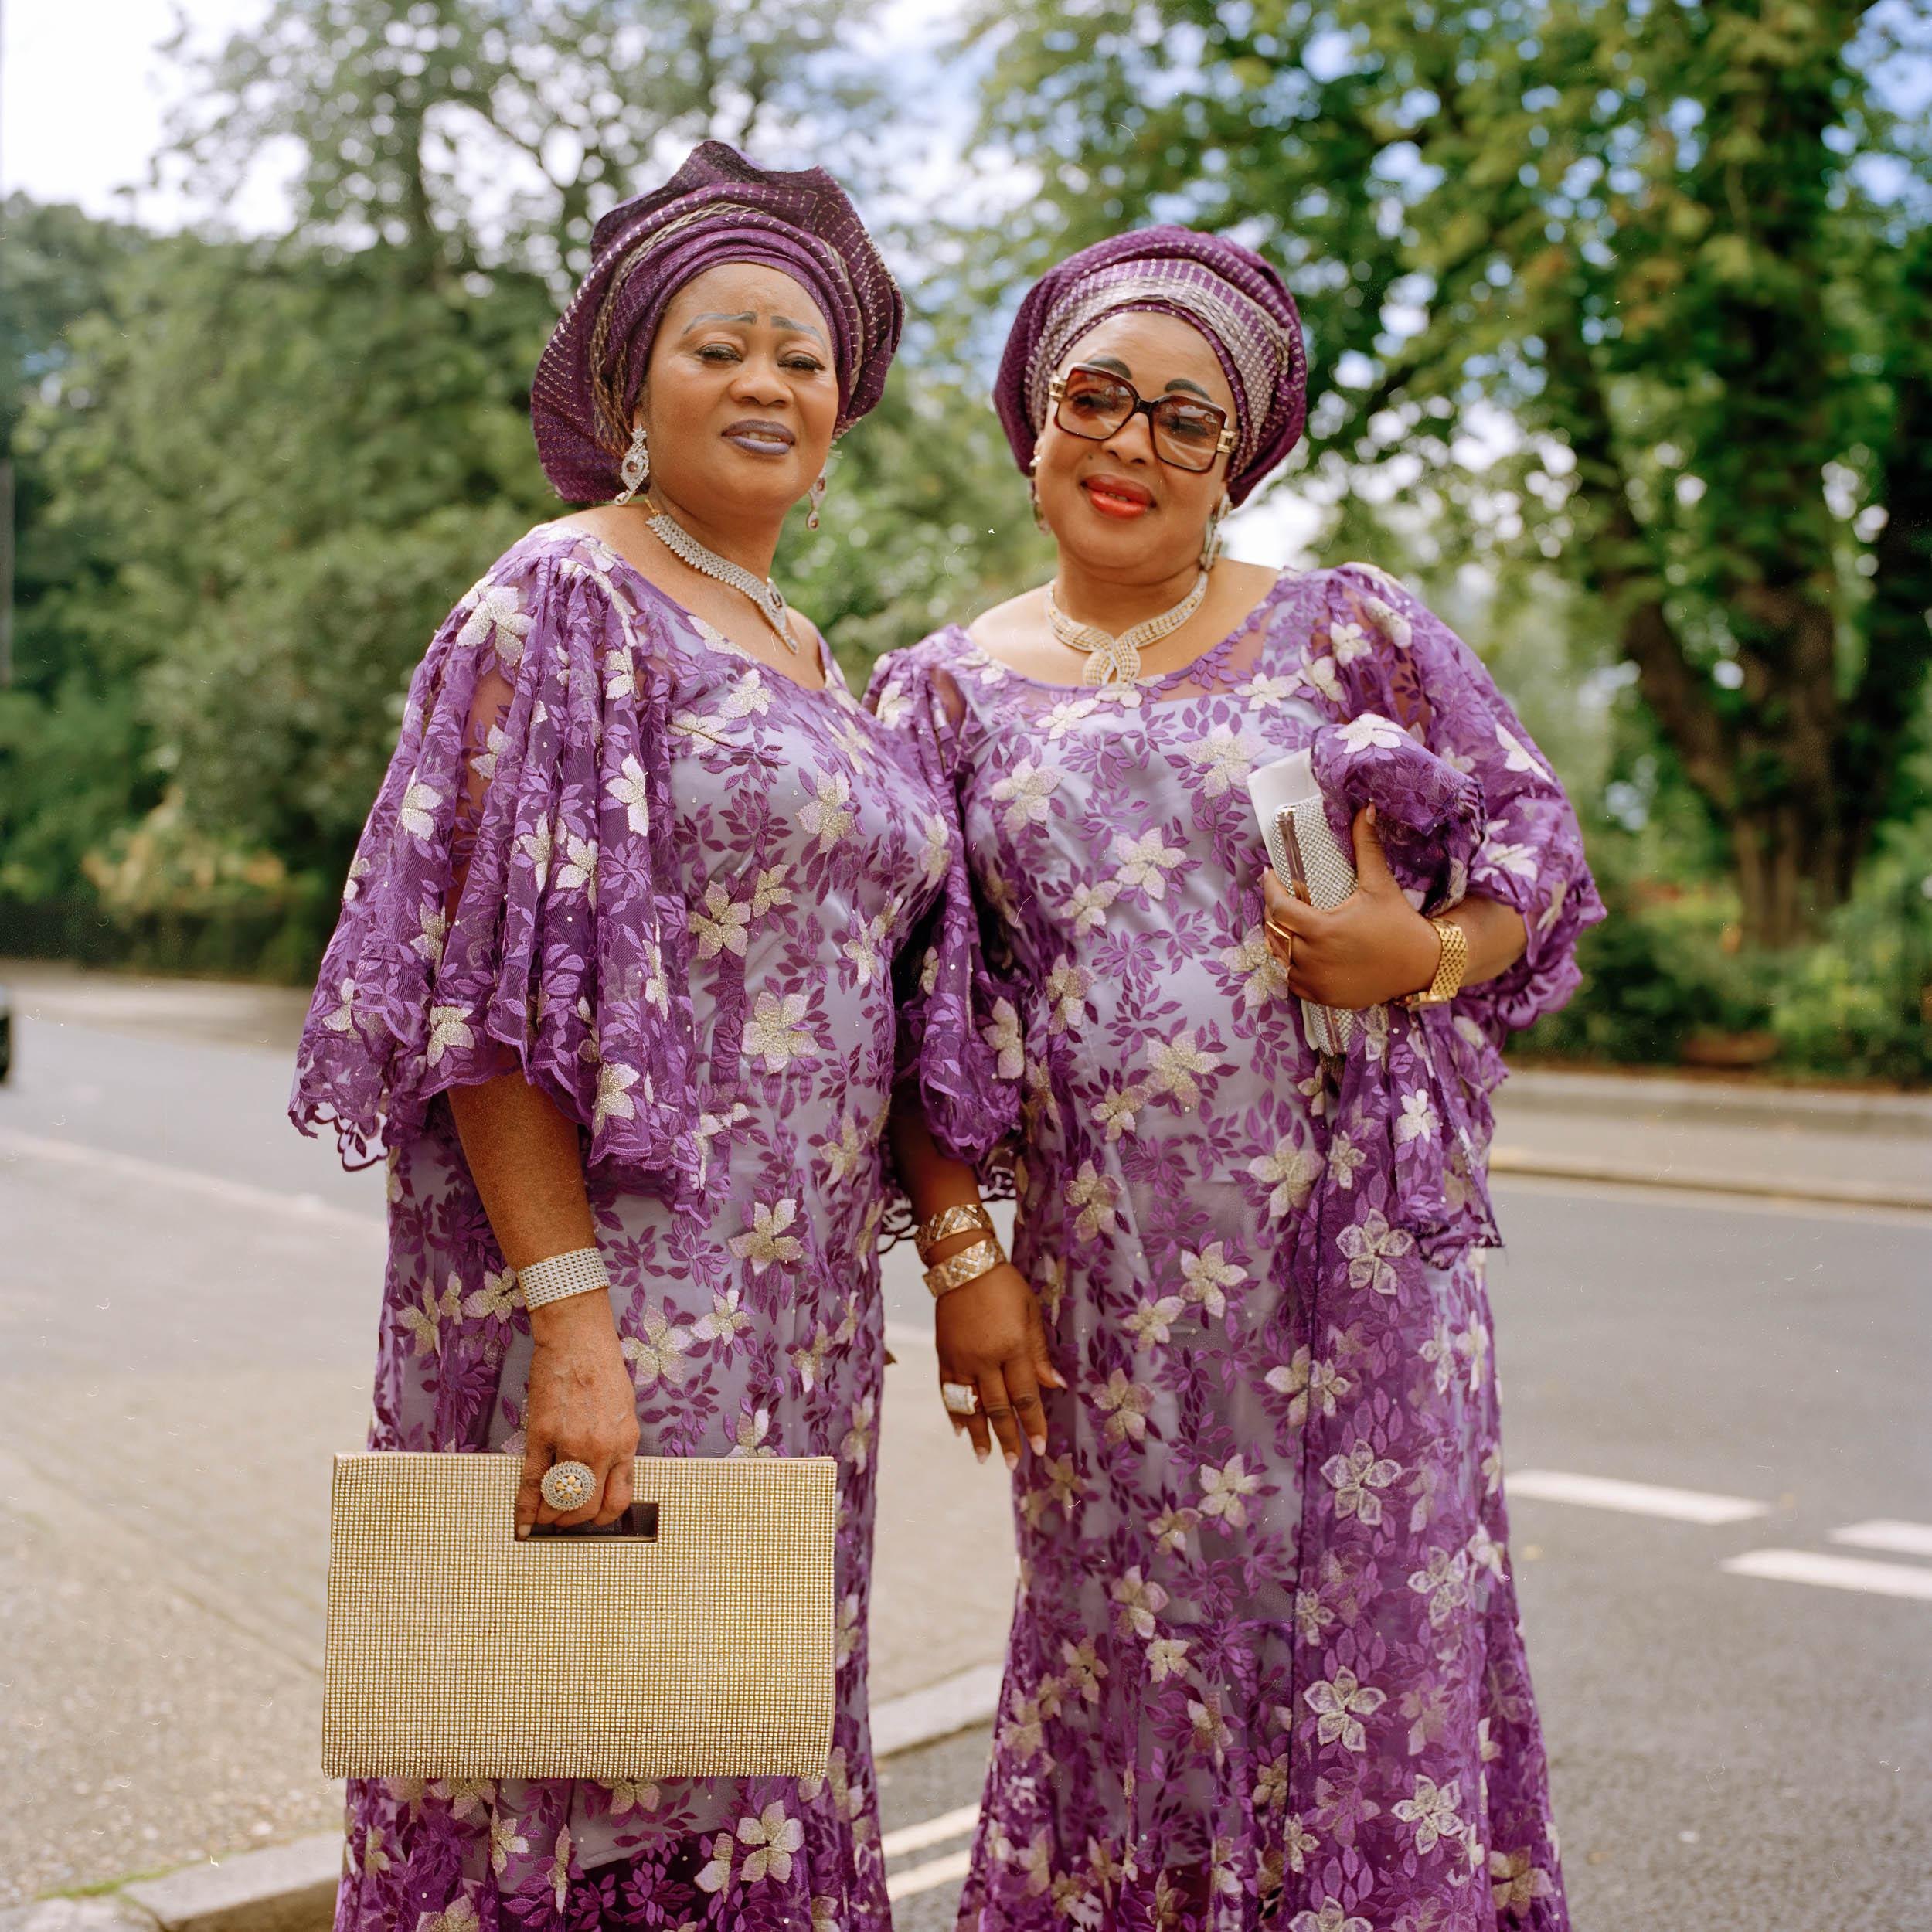 PORTRAIT OF TWO  WOMEN ON THEIR WAY TO CHURCH  IN NORTH LONDON